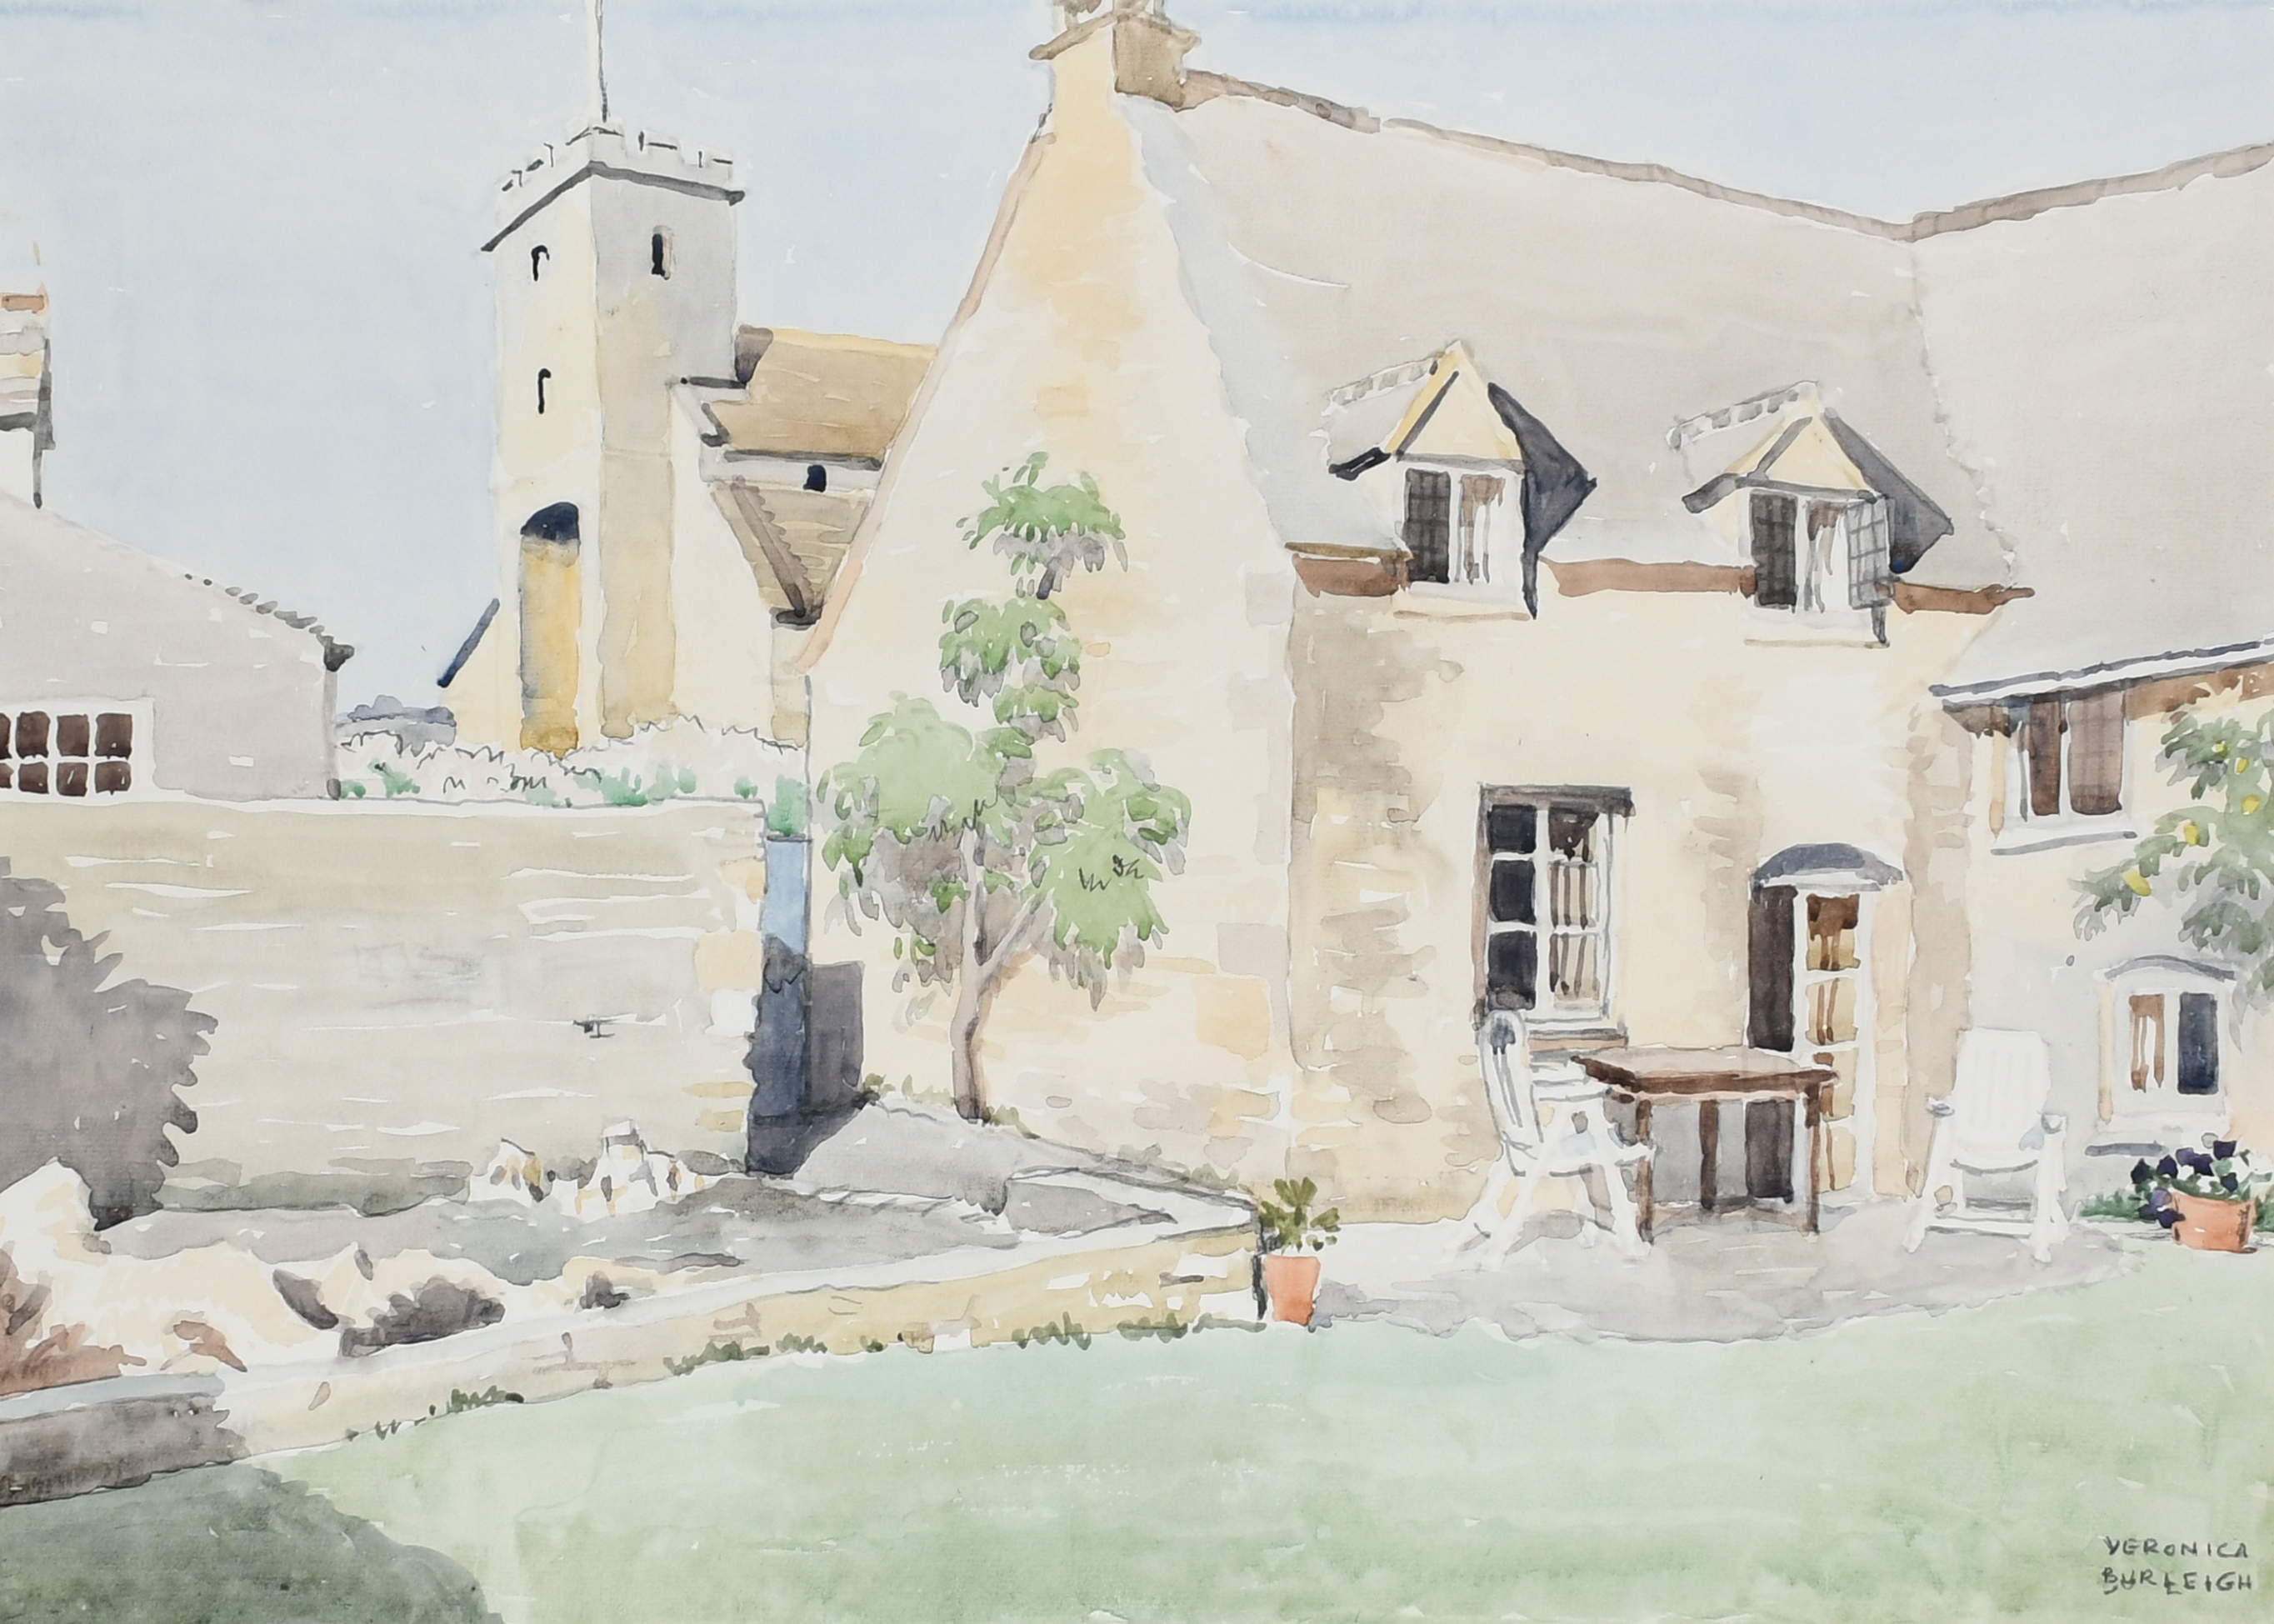 ‡Veronica Burleigh (1909-1999) View of Pebble Court Signed VERONICA BURLEIGH (lower right) Pencil